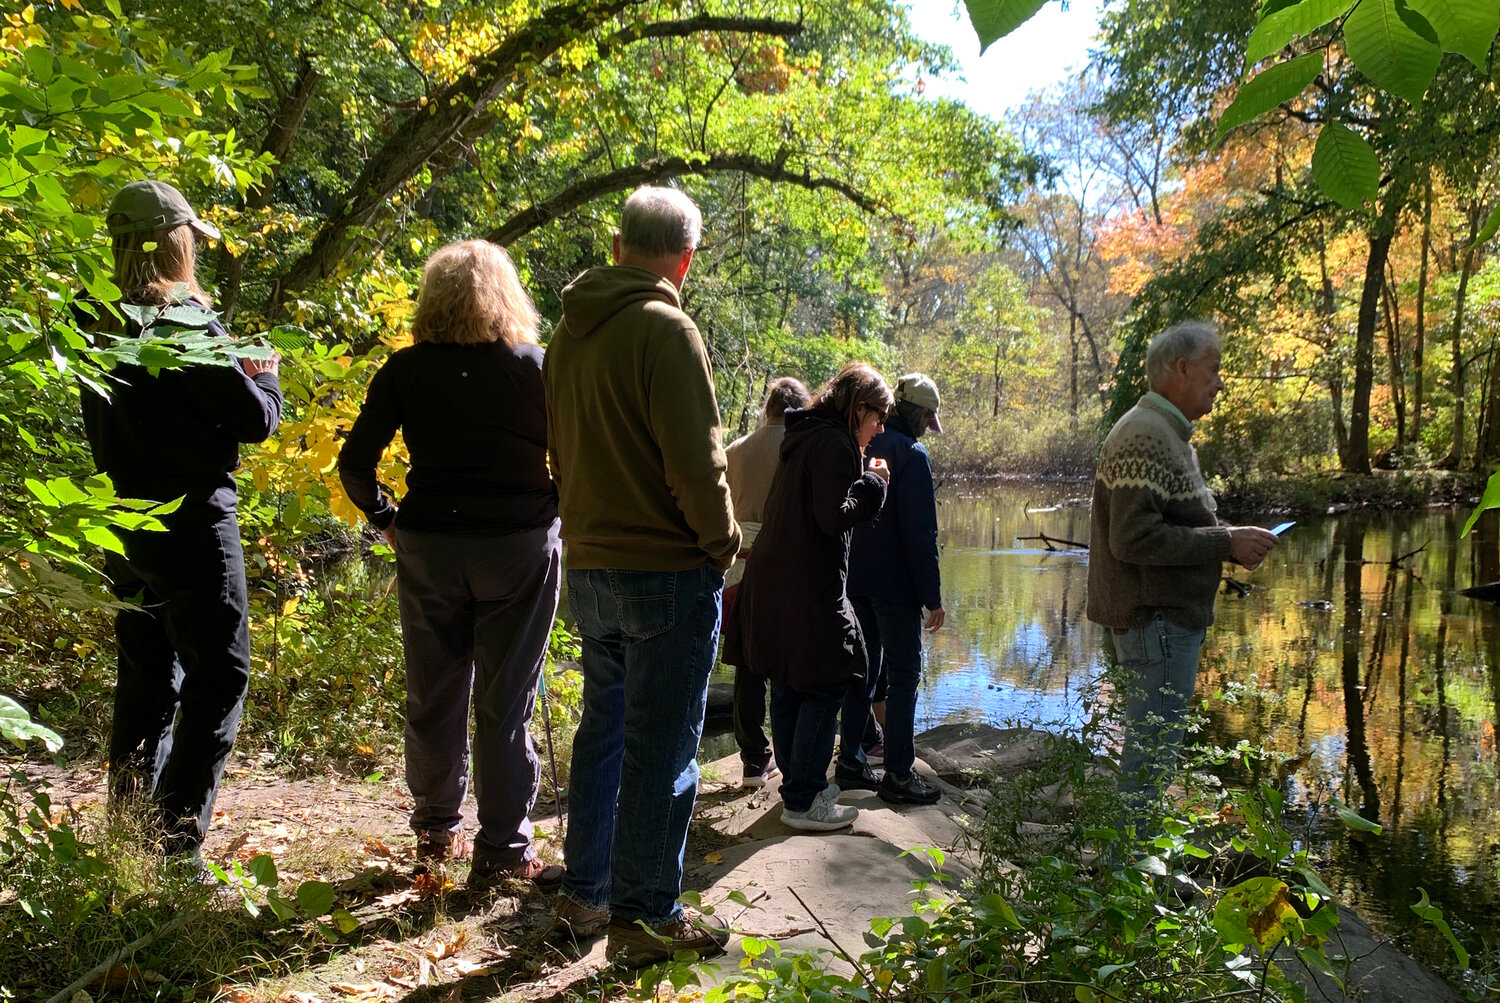 A guided walk at Hunts Mills led by the East Providence Conservation Commission